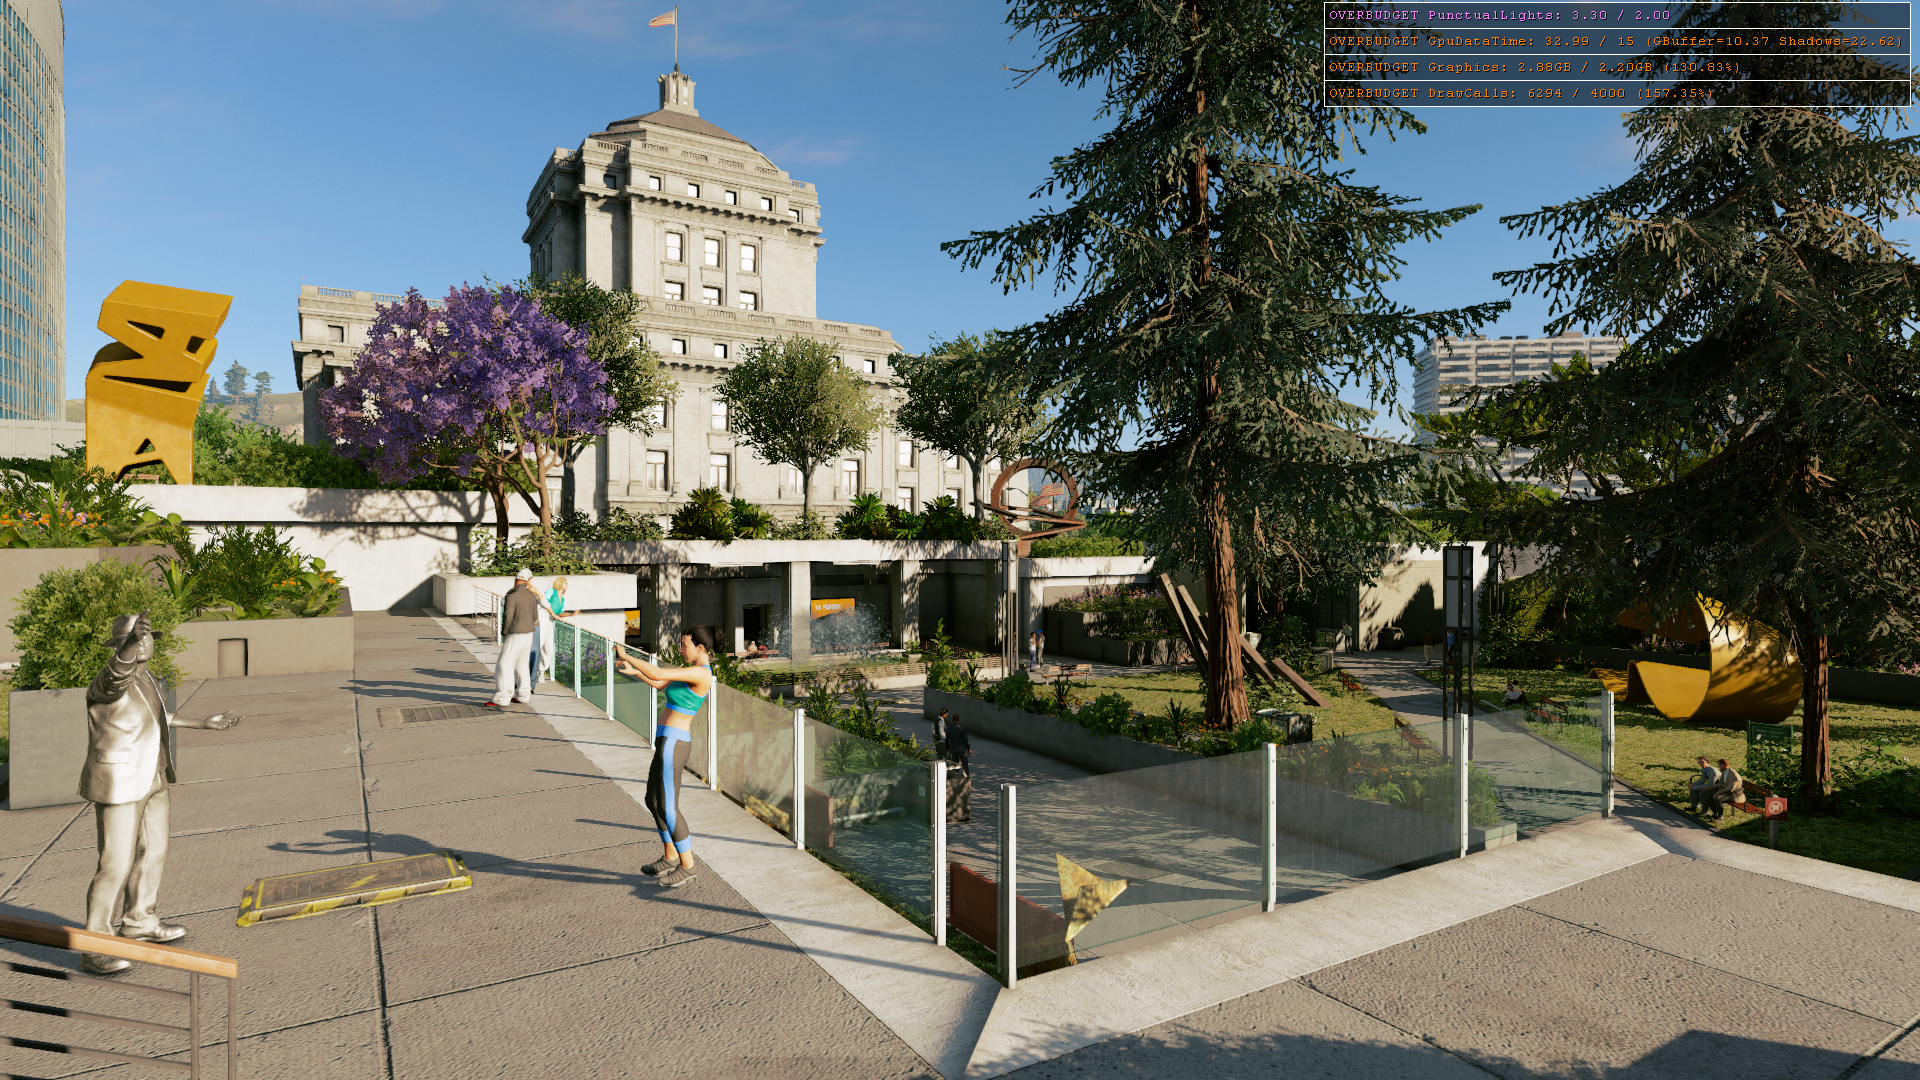 After - Watch Dogs 2 Temporal Filtering On Or Off , HD Wallpaper & Backgrounds